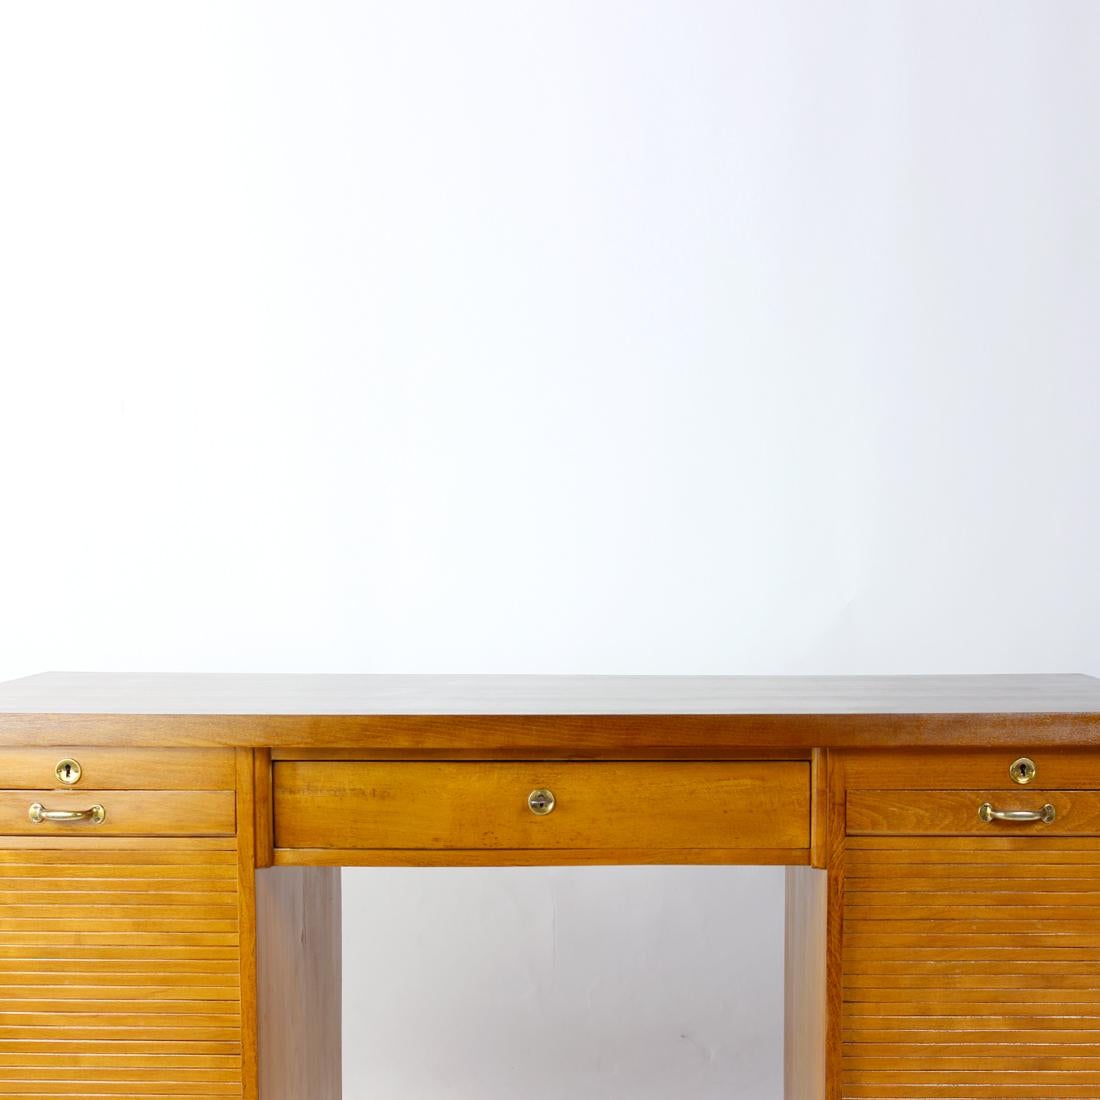 What a desk! This beautiful desk is fully restored to an amazing condition. Produced in Czechoslovakia in 1940s, the desk came to us in a rather poor condition, so we had it redone into this beautiful condition. The desk has two roller doors on each